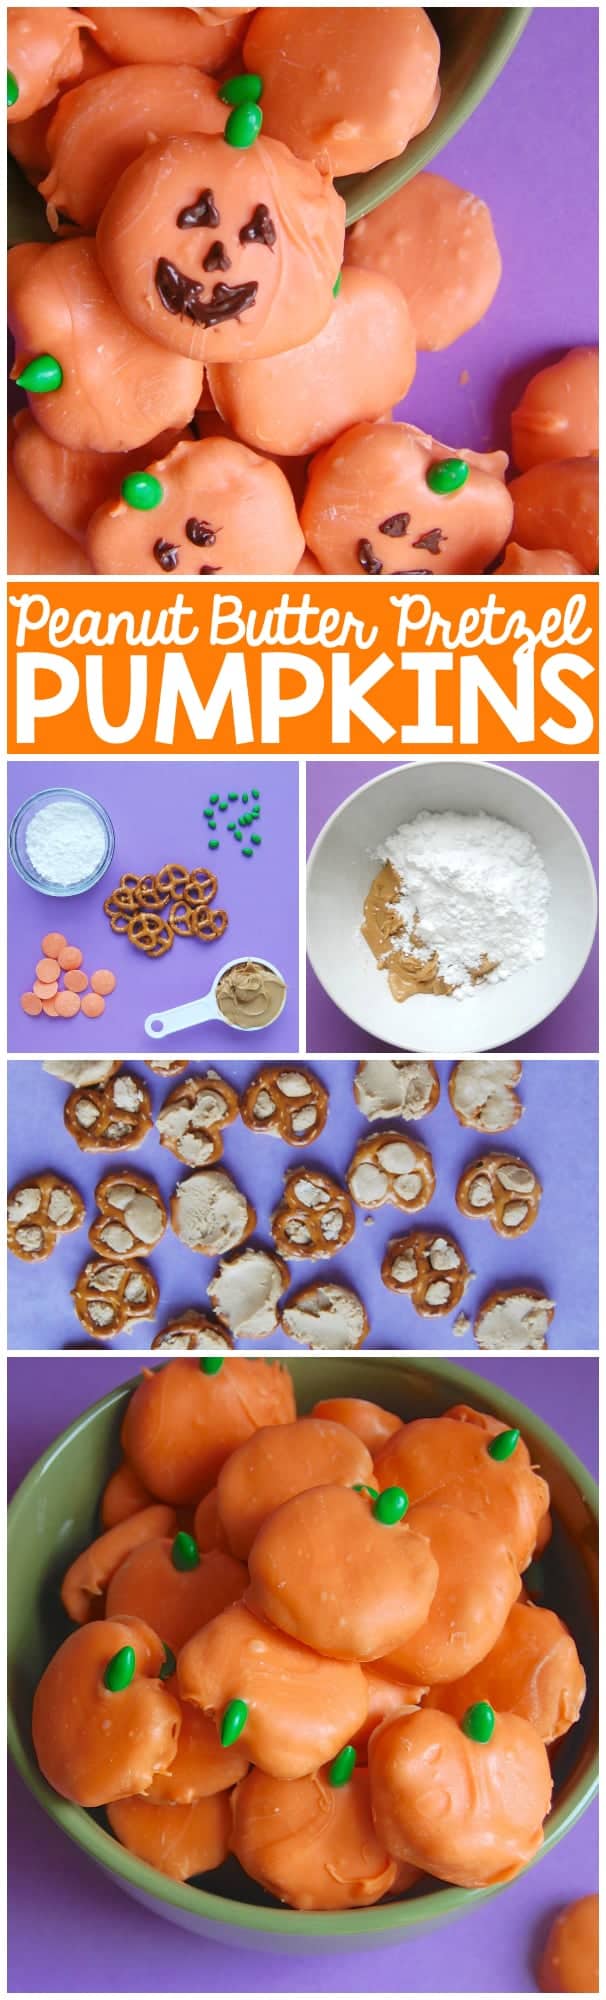 These Peanut Butter Pretzel Pumpkins are stuffed with peanut butter and dressed up as pumpkins just in time for Halloween!